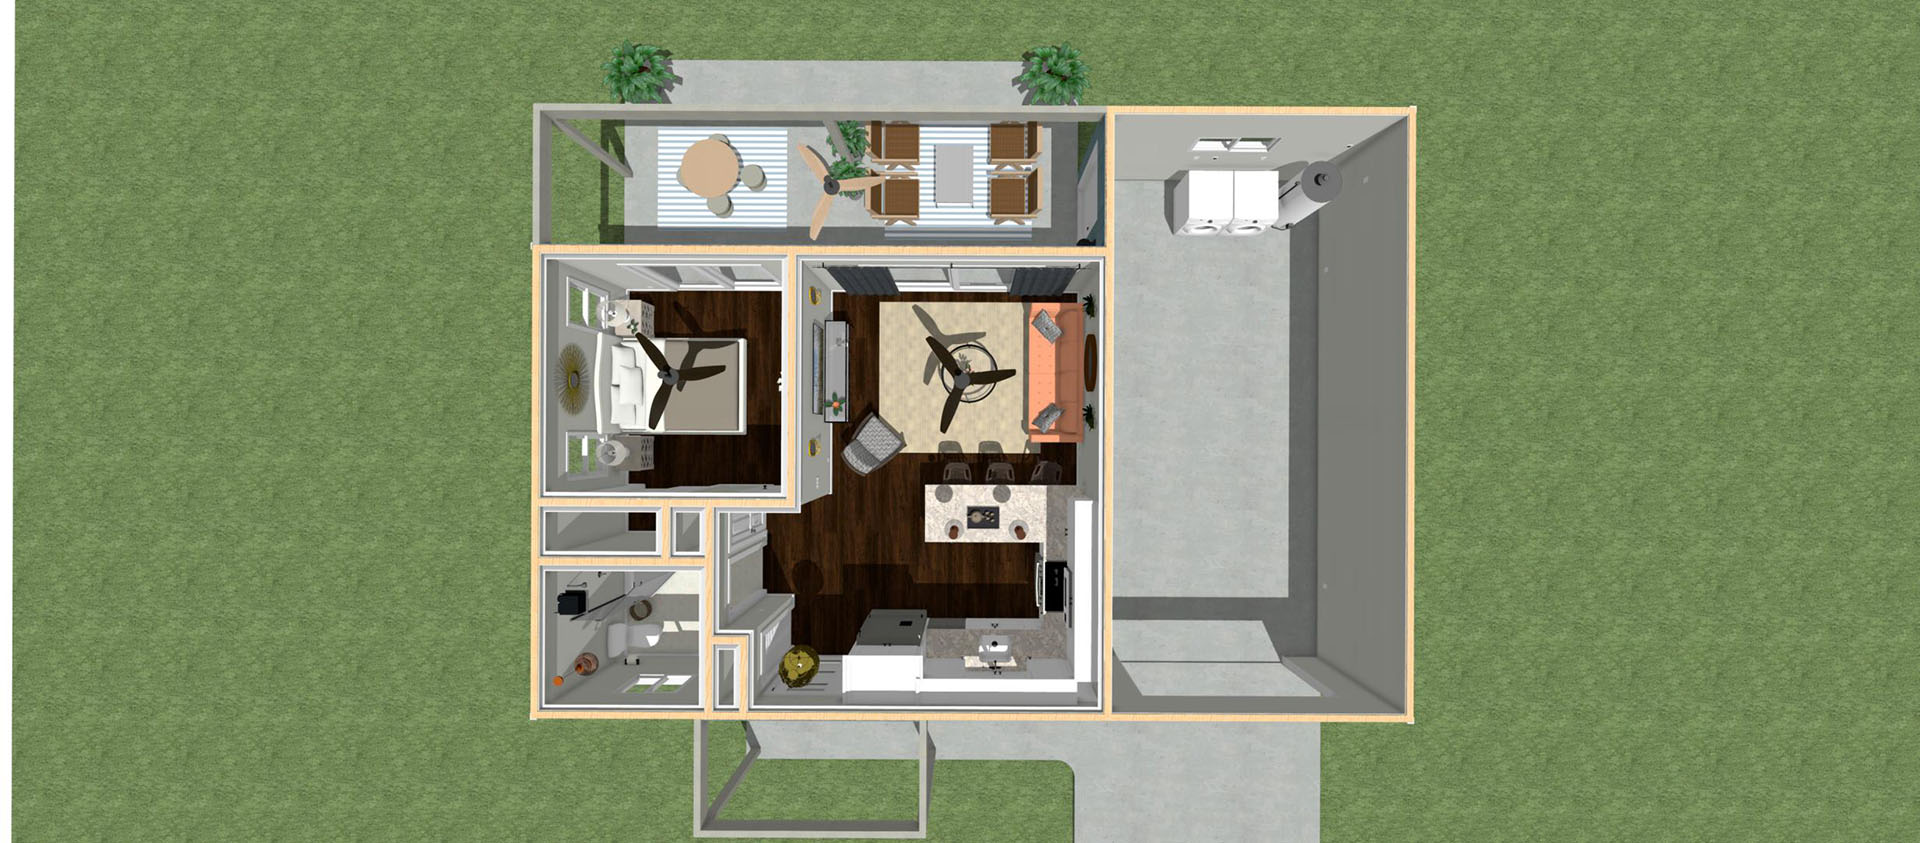 Aerial view of a three bedroom house